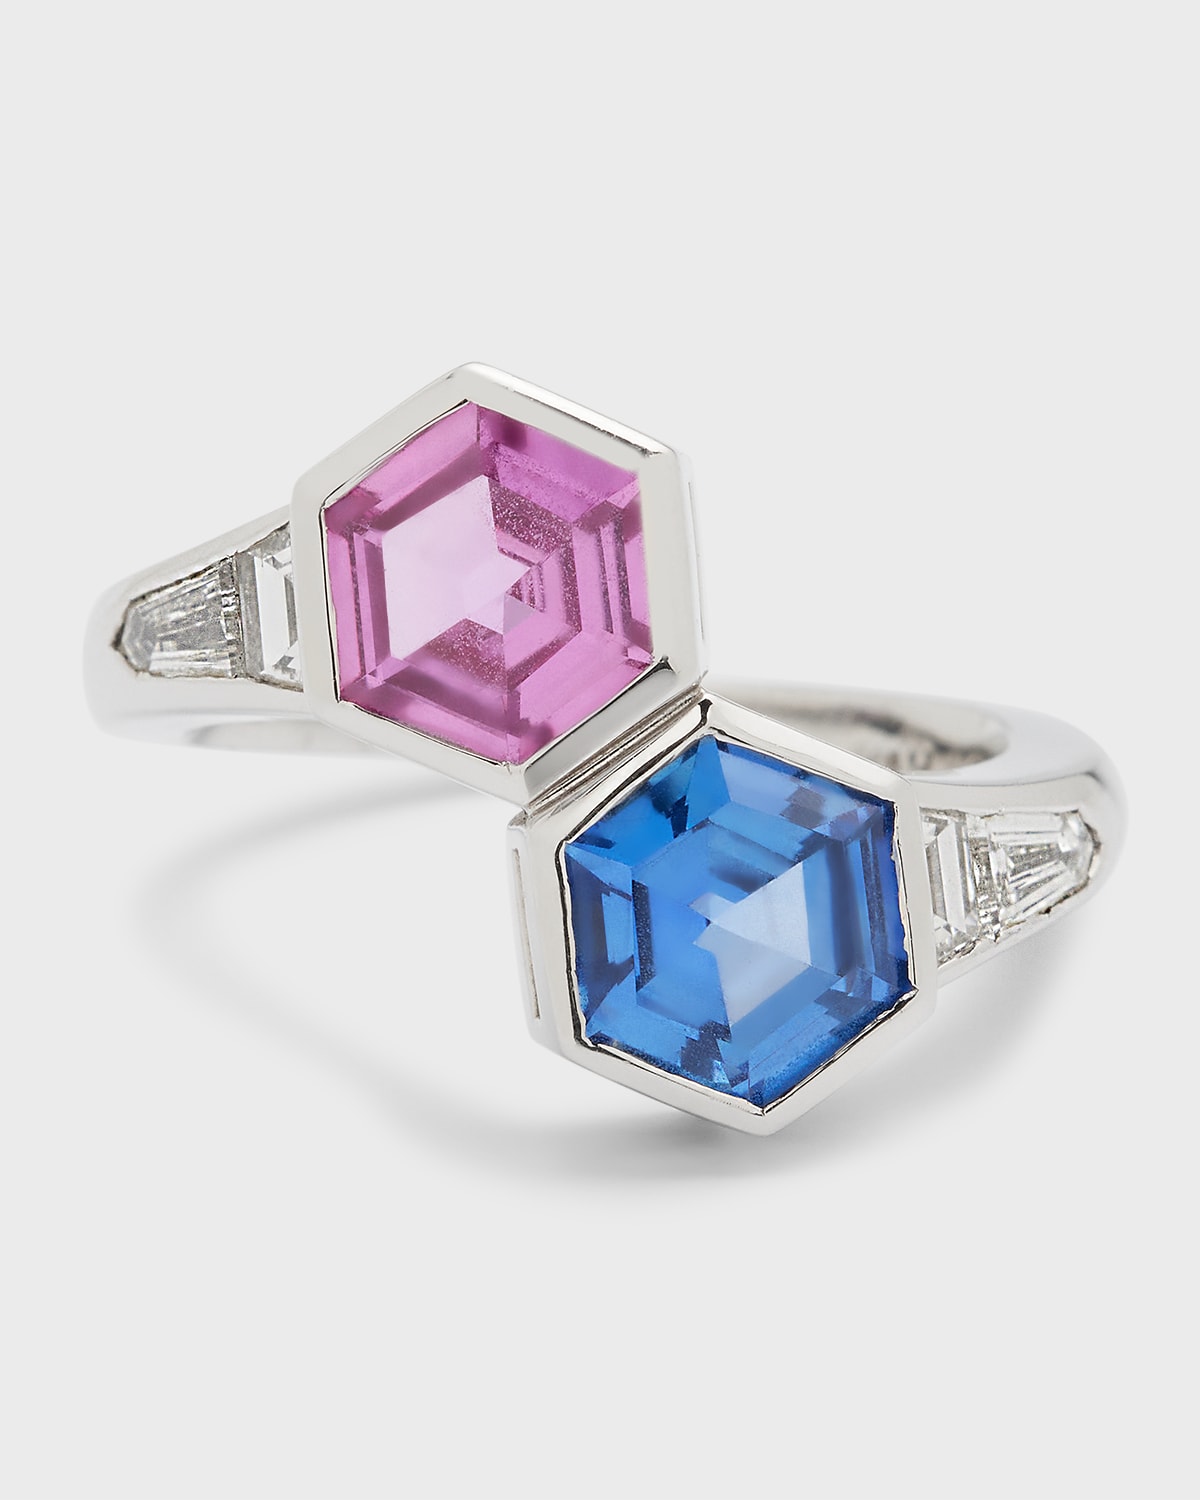 Bayco Platinum Pink And Blue Sapphire Ring With F/vvs1-vs Diamonds In Metallic